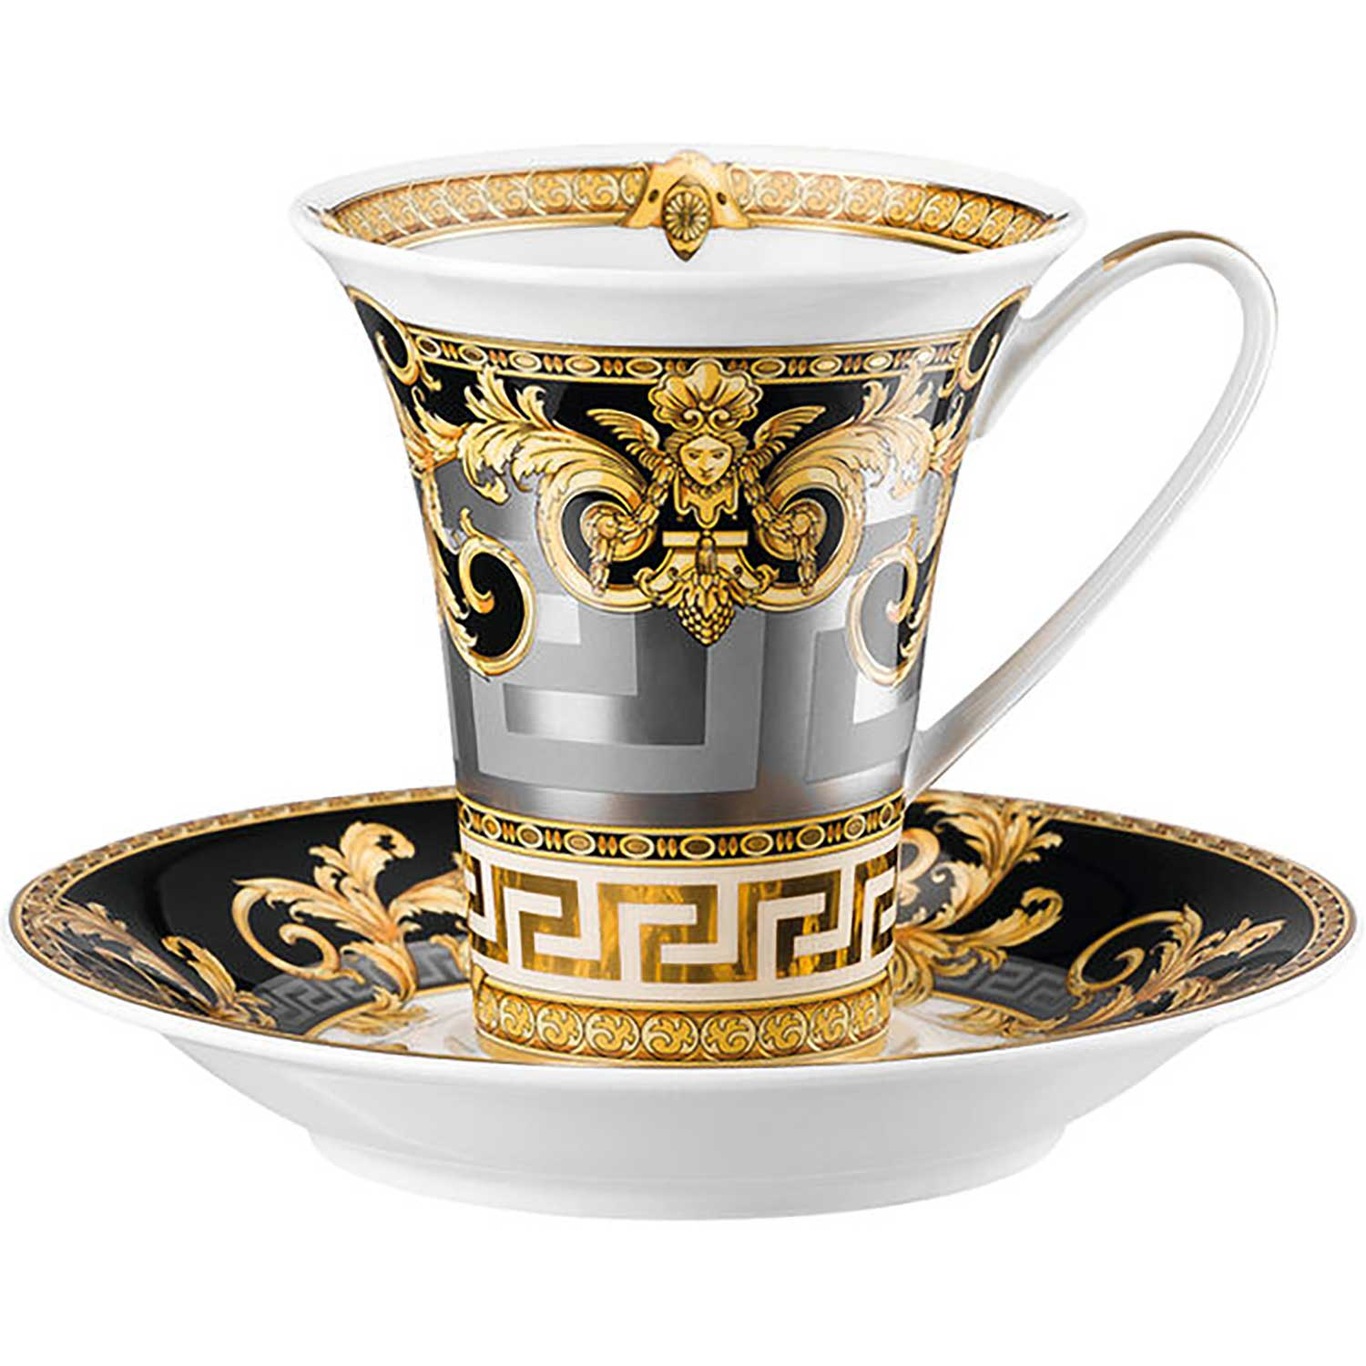 Versace Prestige Gala Coffee Cup With Saucer